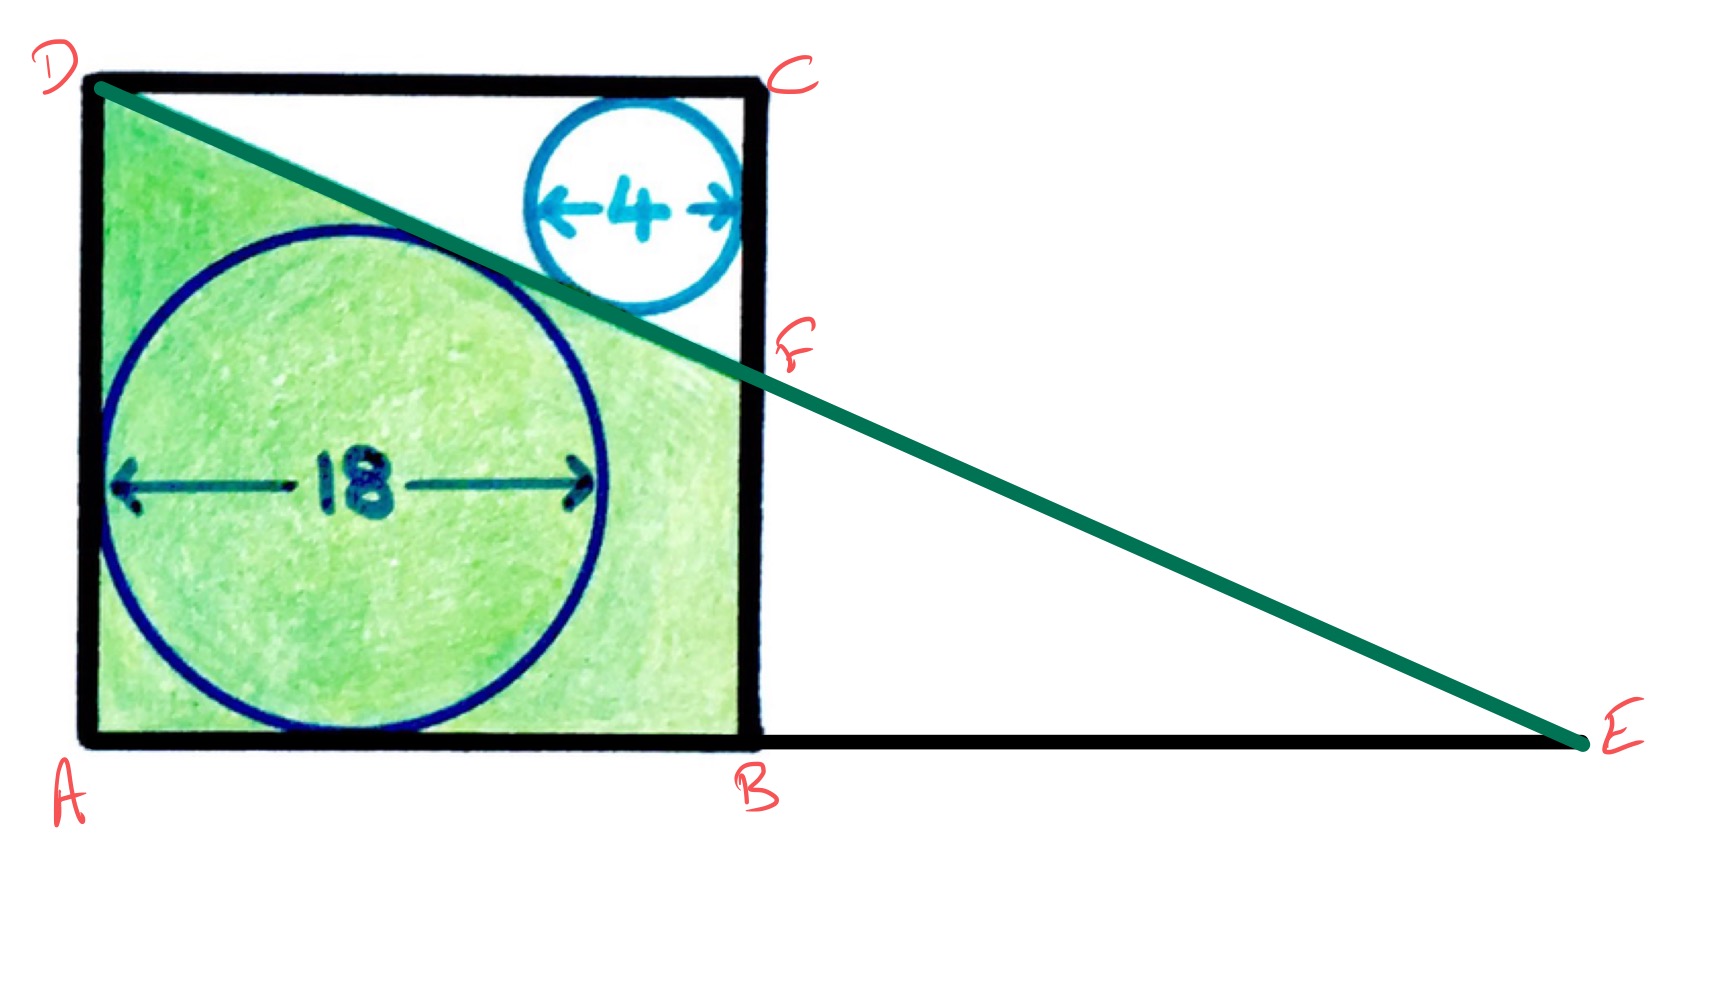 Two circles in a square labelled